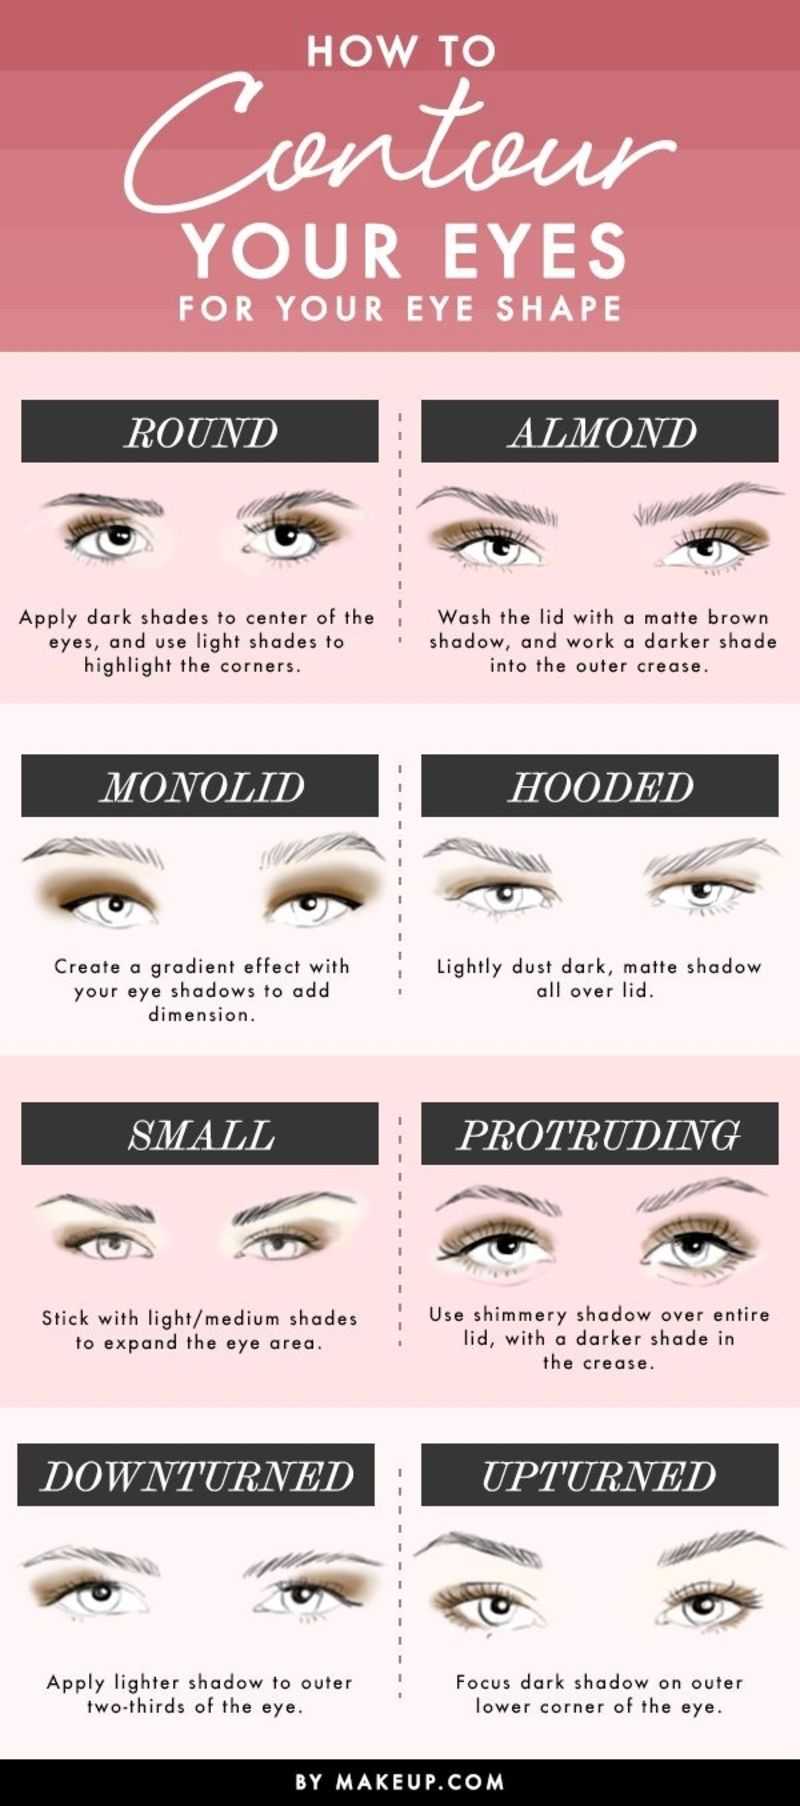 How To Contour Your Eyes